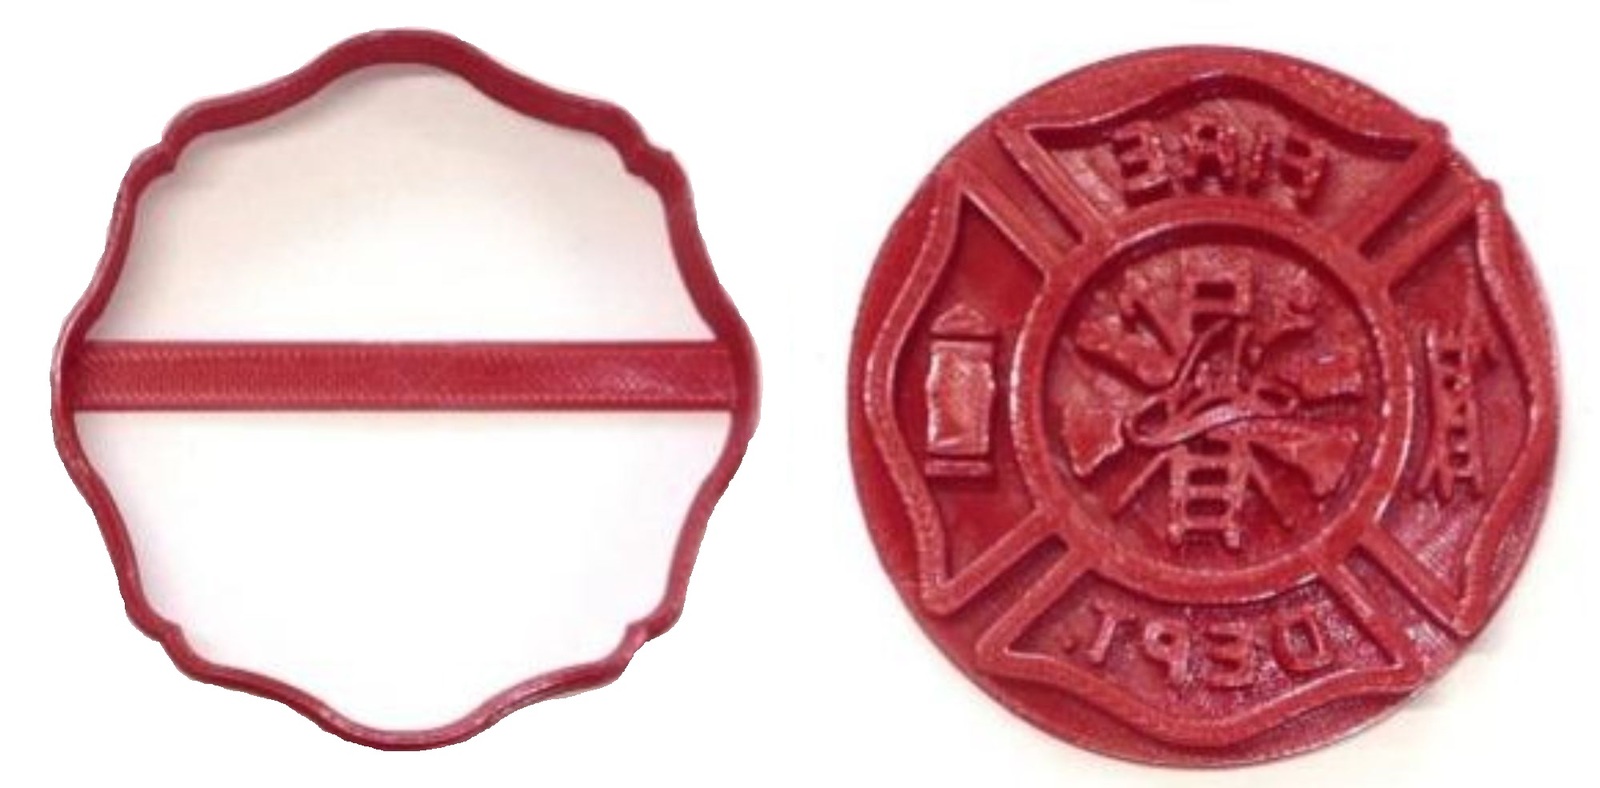 Fire Department Symbol Maltese Cross Set of 2 Cookie Cutter and Stamp USA PR1570